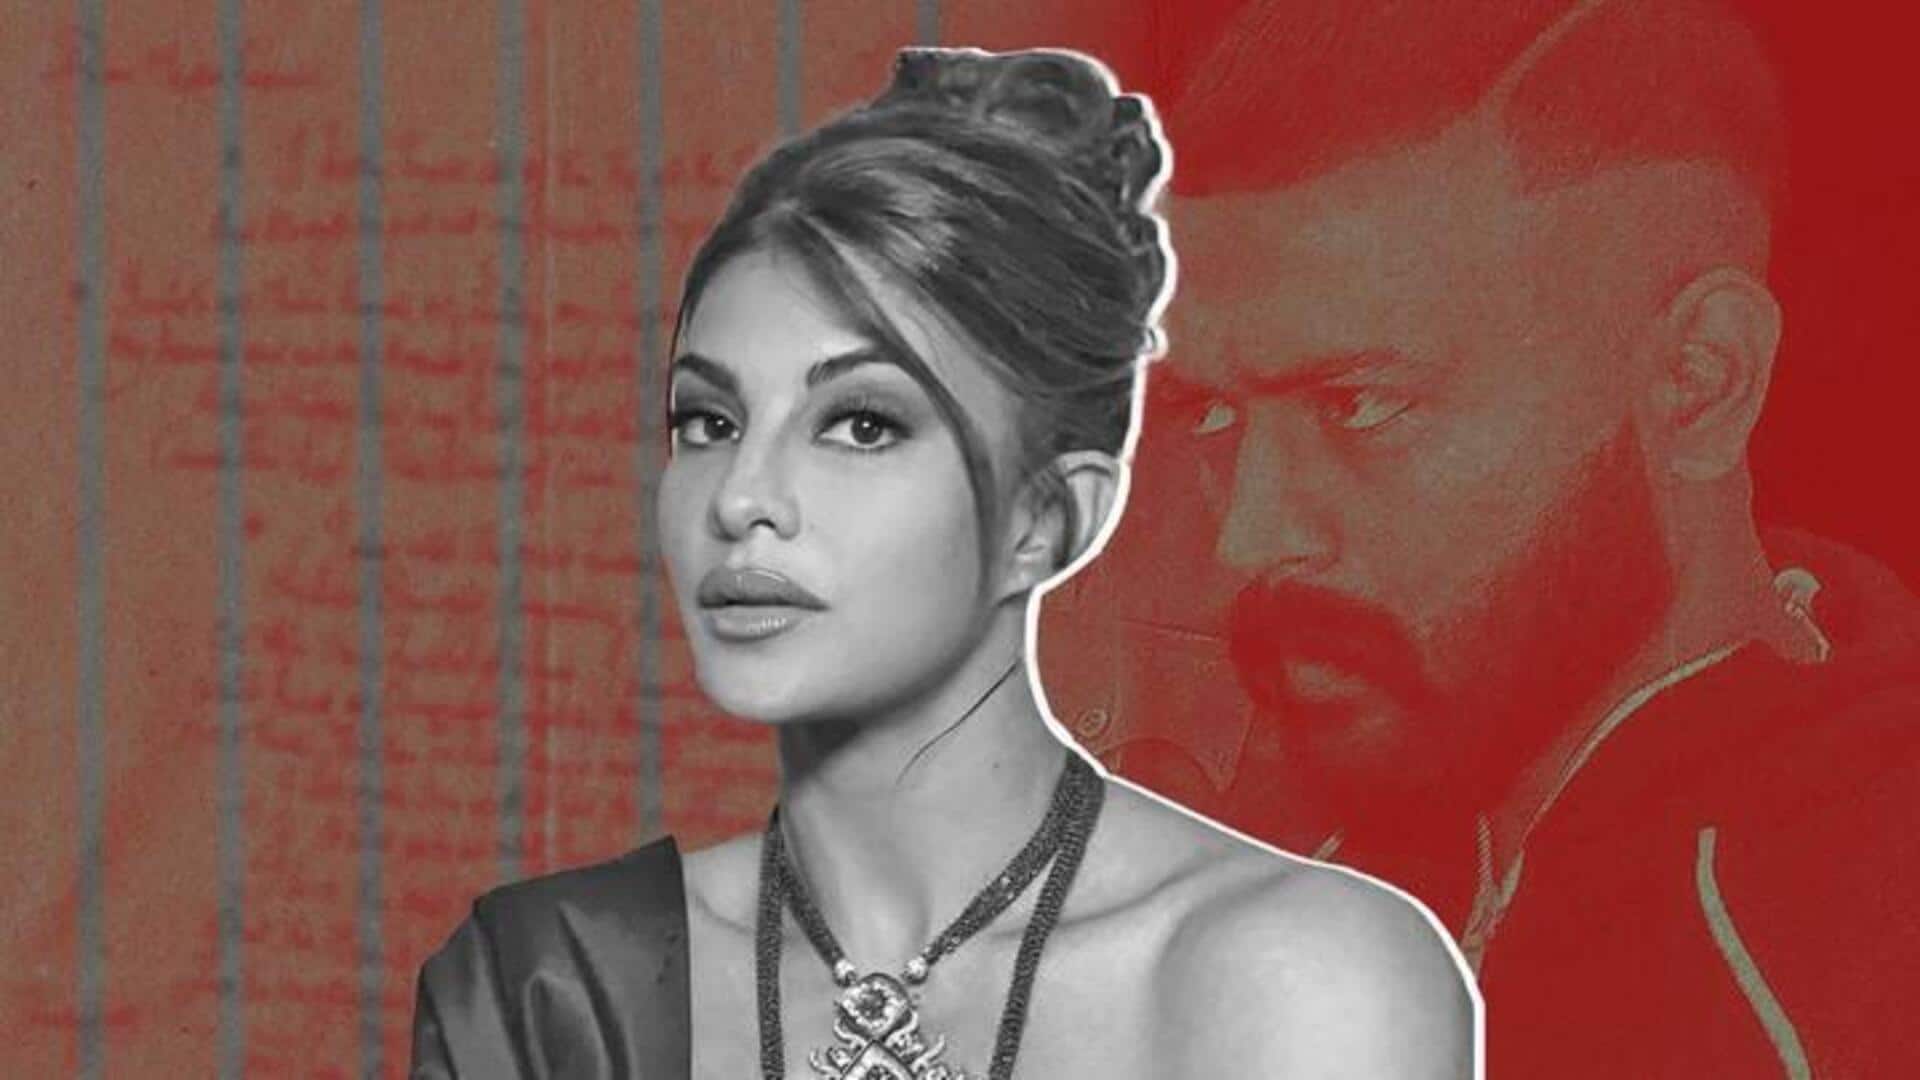 Sukesh Chandrasekhar lauds Jacqueline's song 'Yimmy Yimmy' in new letter